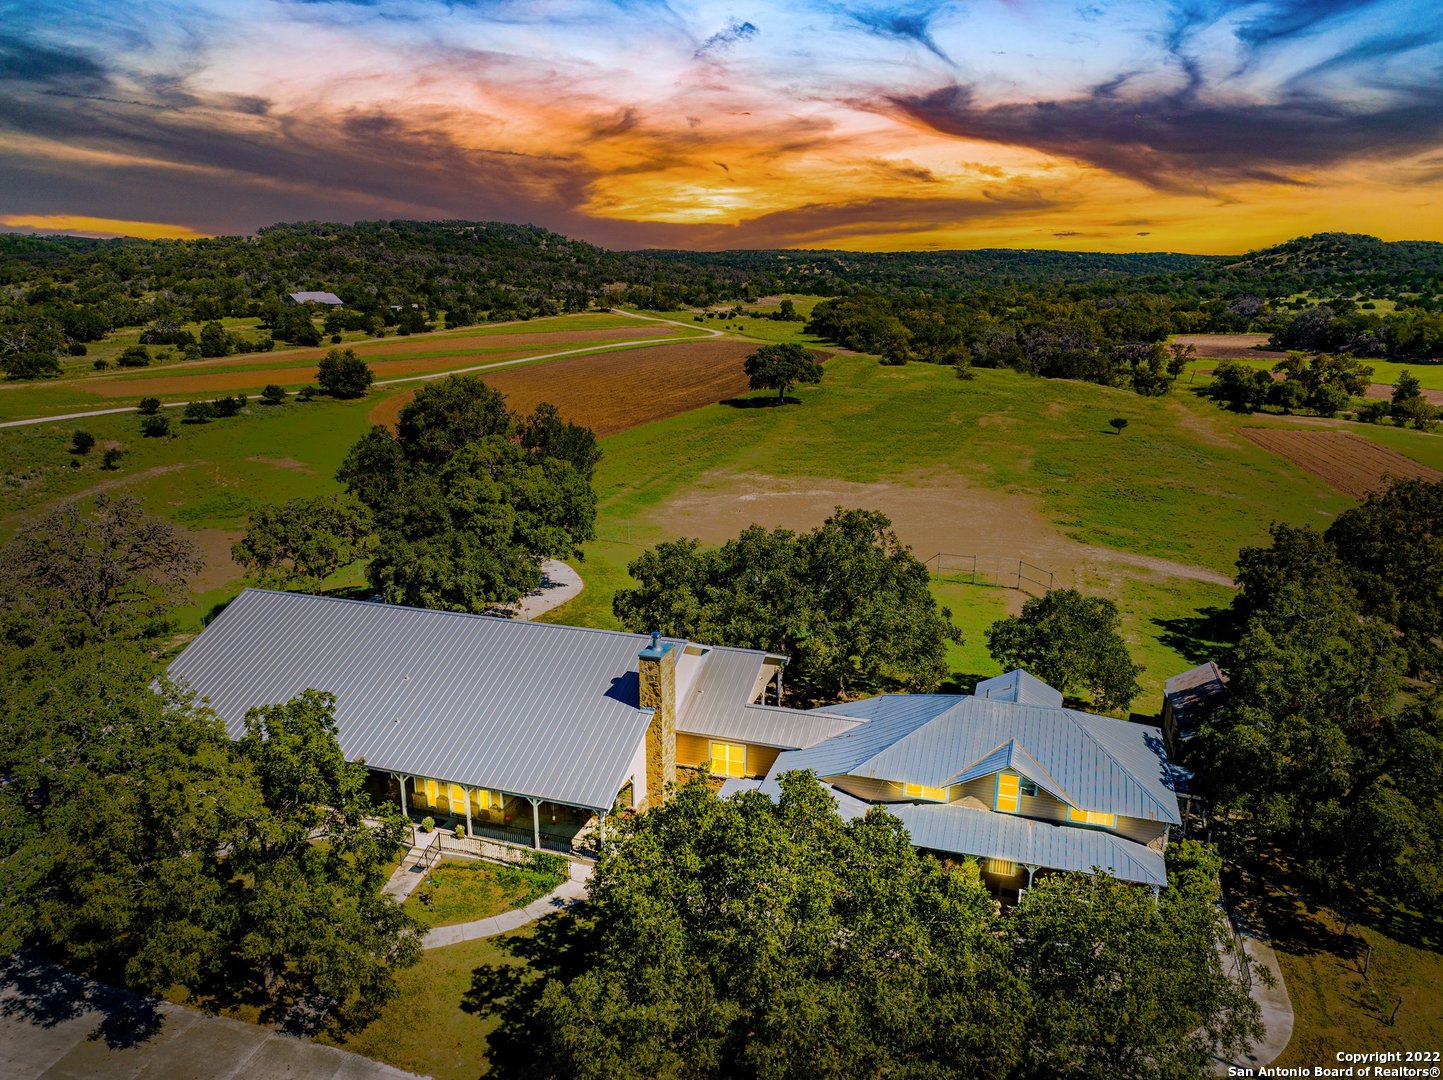 This is a one of a kind property in an amazing location situated just minutes away from Fredericksburg and the epic Texas wine corridor. Old #9 Hwy in historic Comfort...from the moment that you step on this beautiful property you experience the Texas Hill Country at its best! Enjoy spectacular views from high elevations. This property also features level, open cultivated fields surrounded by Live Oak, Pecan, Black Walnut and Sycamore trees. Year-round Block Creek runs through this property and provides a semicircle waterfall surrounding your very own "swimming hole". A deep gunited area of the creek is the perfect place to enjoy a summer day. There is an unnamed spring that runs for approximately 1,980 feet through the property with a spring box. This property features an original home that was built in the 1920's which has been completely redone and updated. A new home was built in 2013 featuring high ceilings, large fireplace in the great room, and has been fitted as handicap accessible. There are multiple barns, shops, and covered areas. Historic old structures remain and add to the unique ambiance of this historic property. Chandelier in new dining area does not convey.